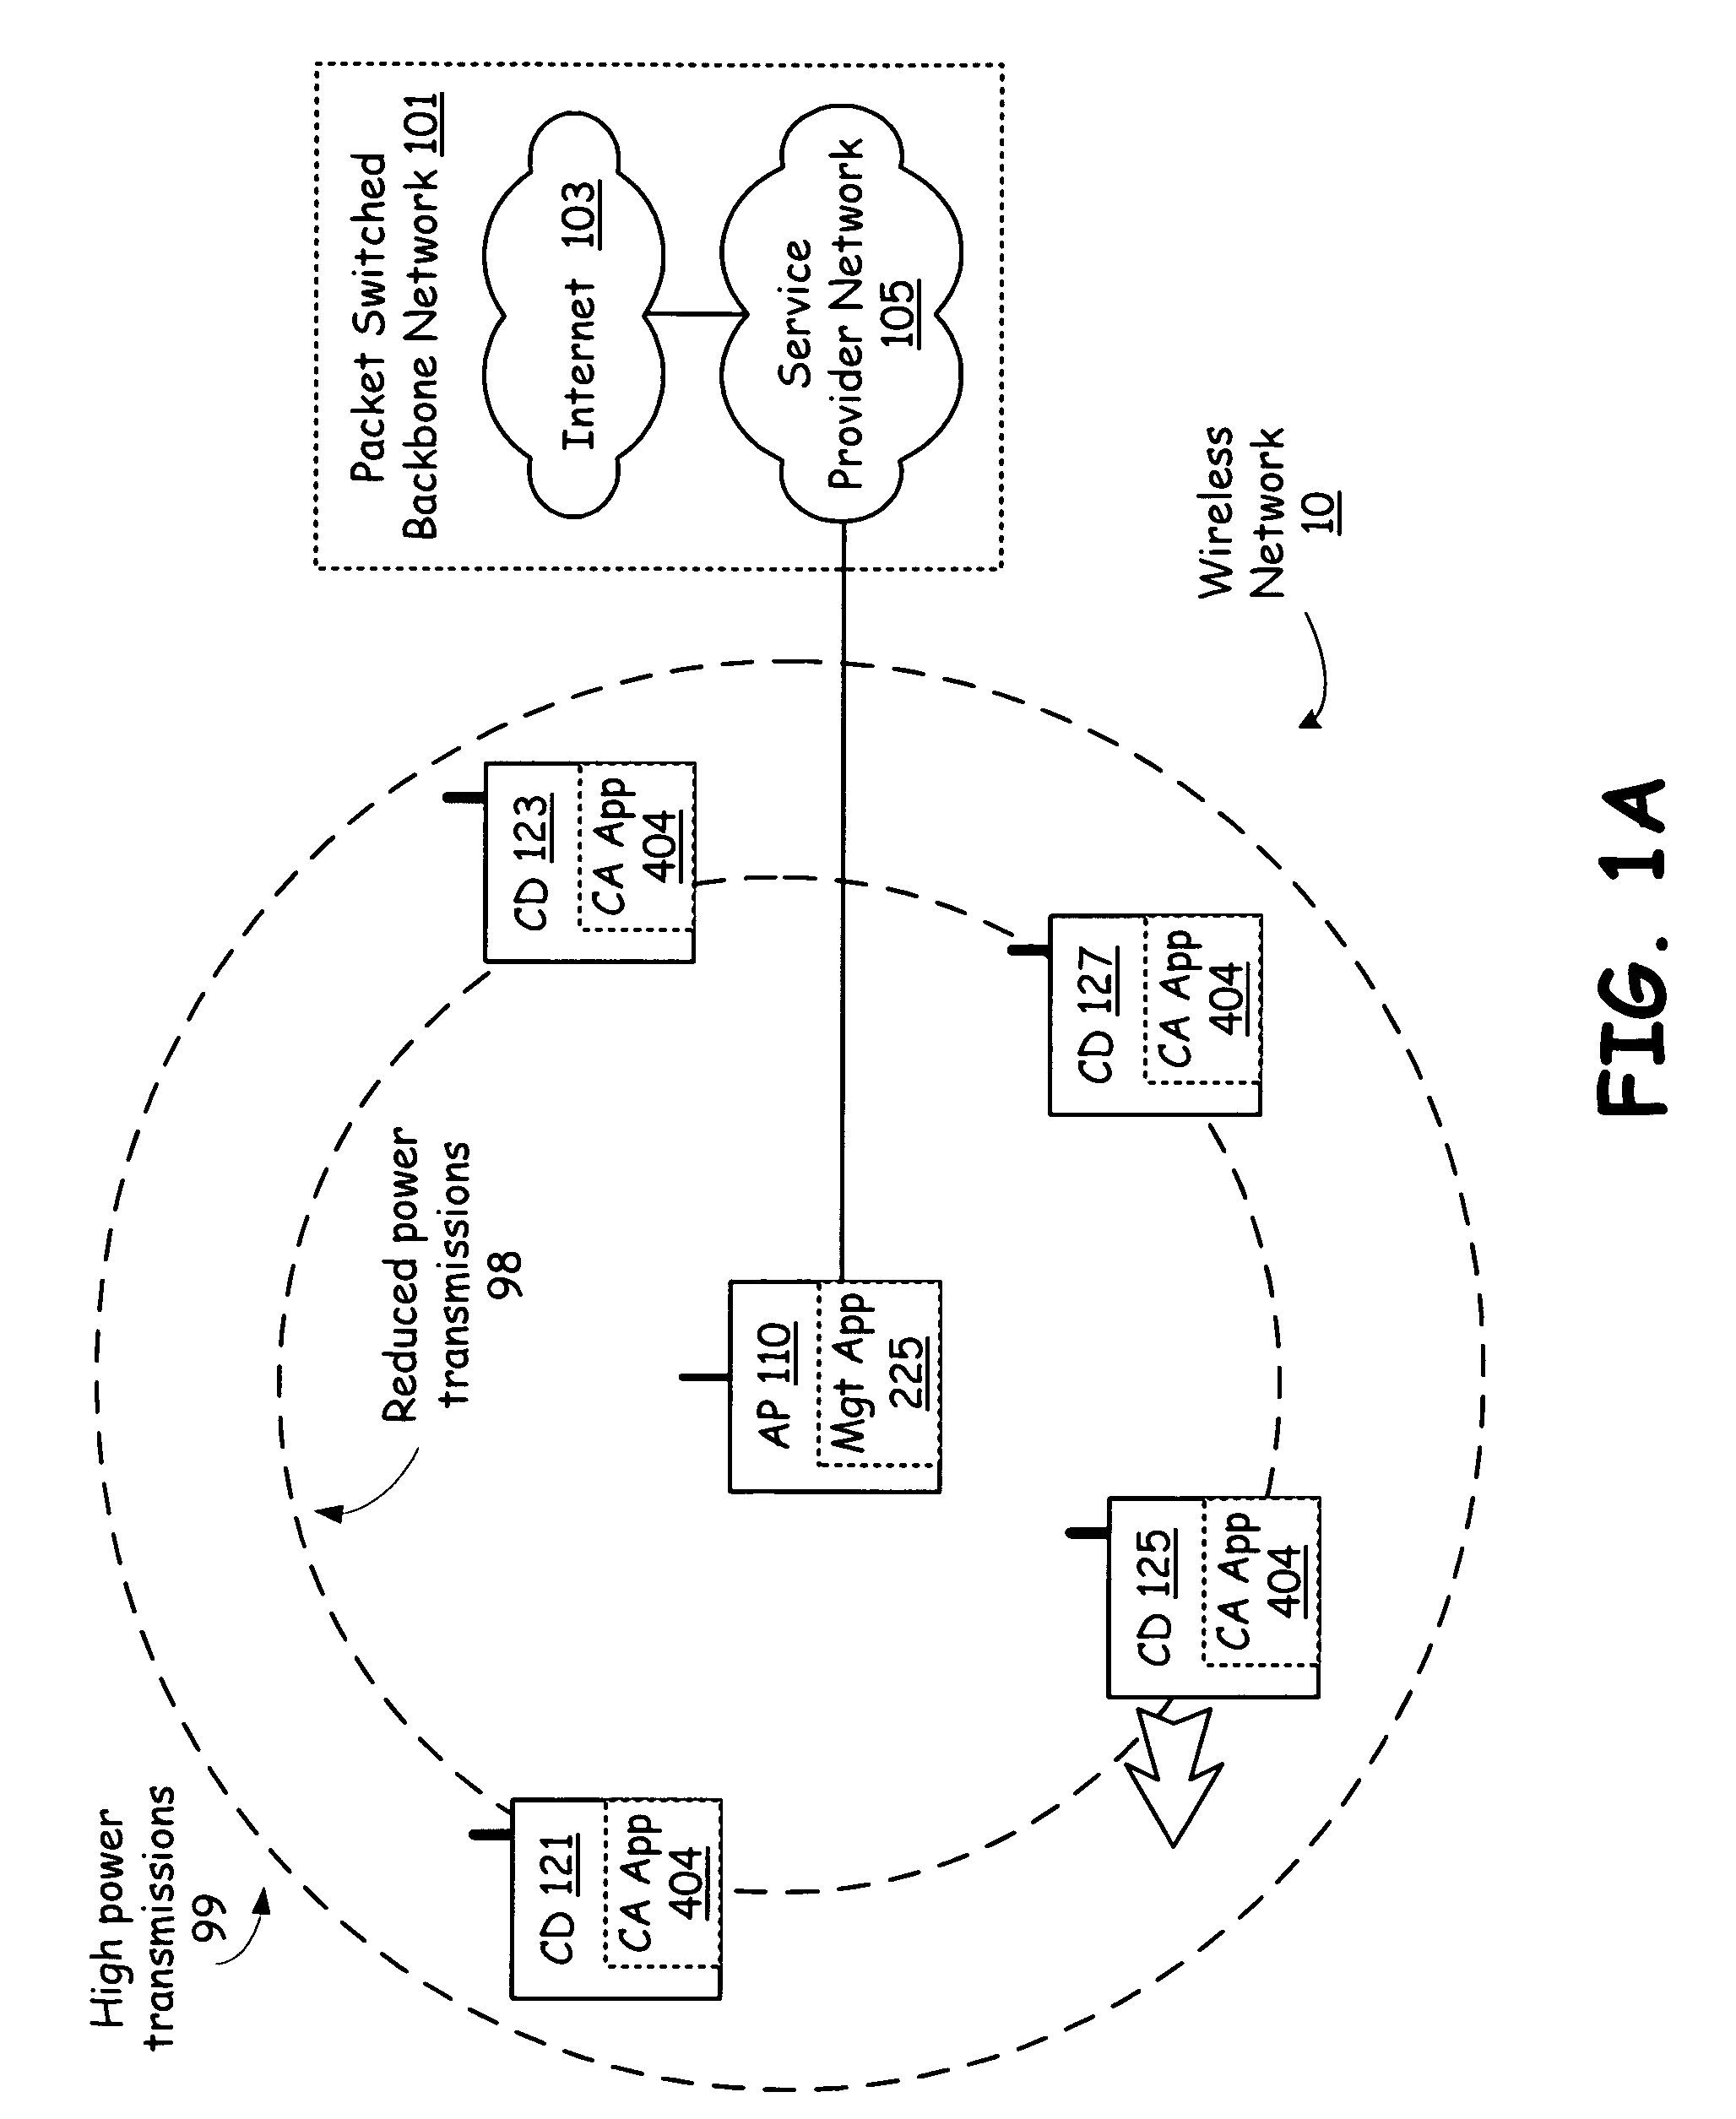 Cell network selectively applying proxy mode to minimize power